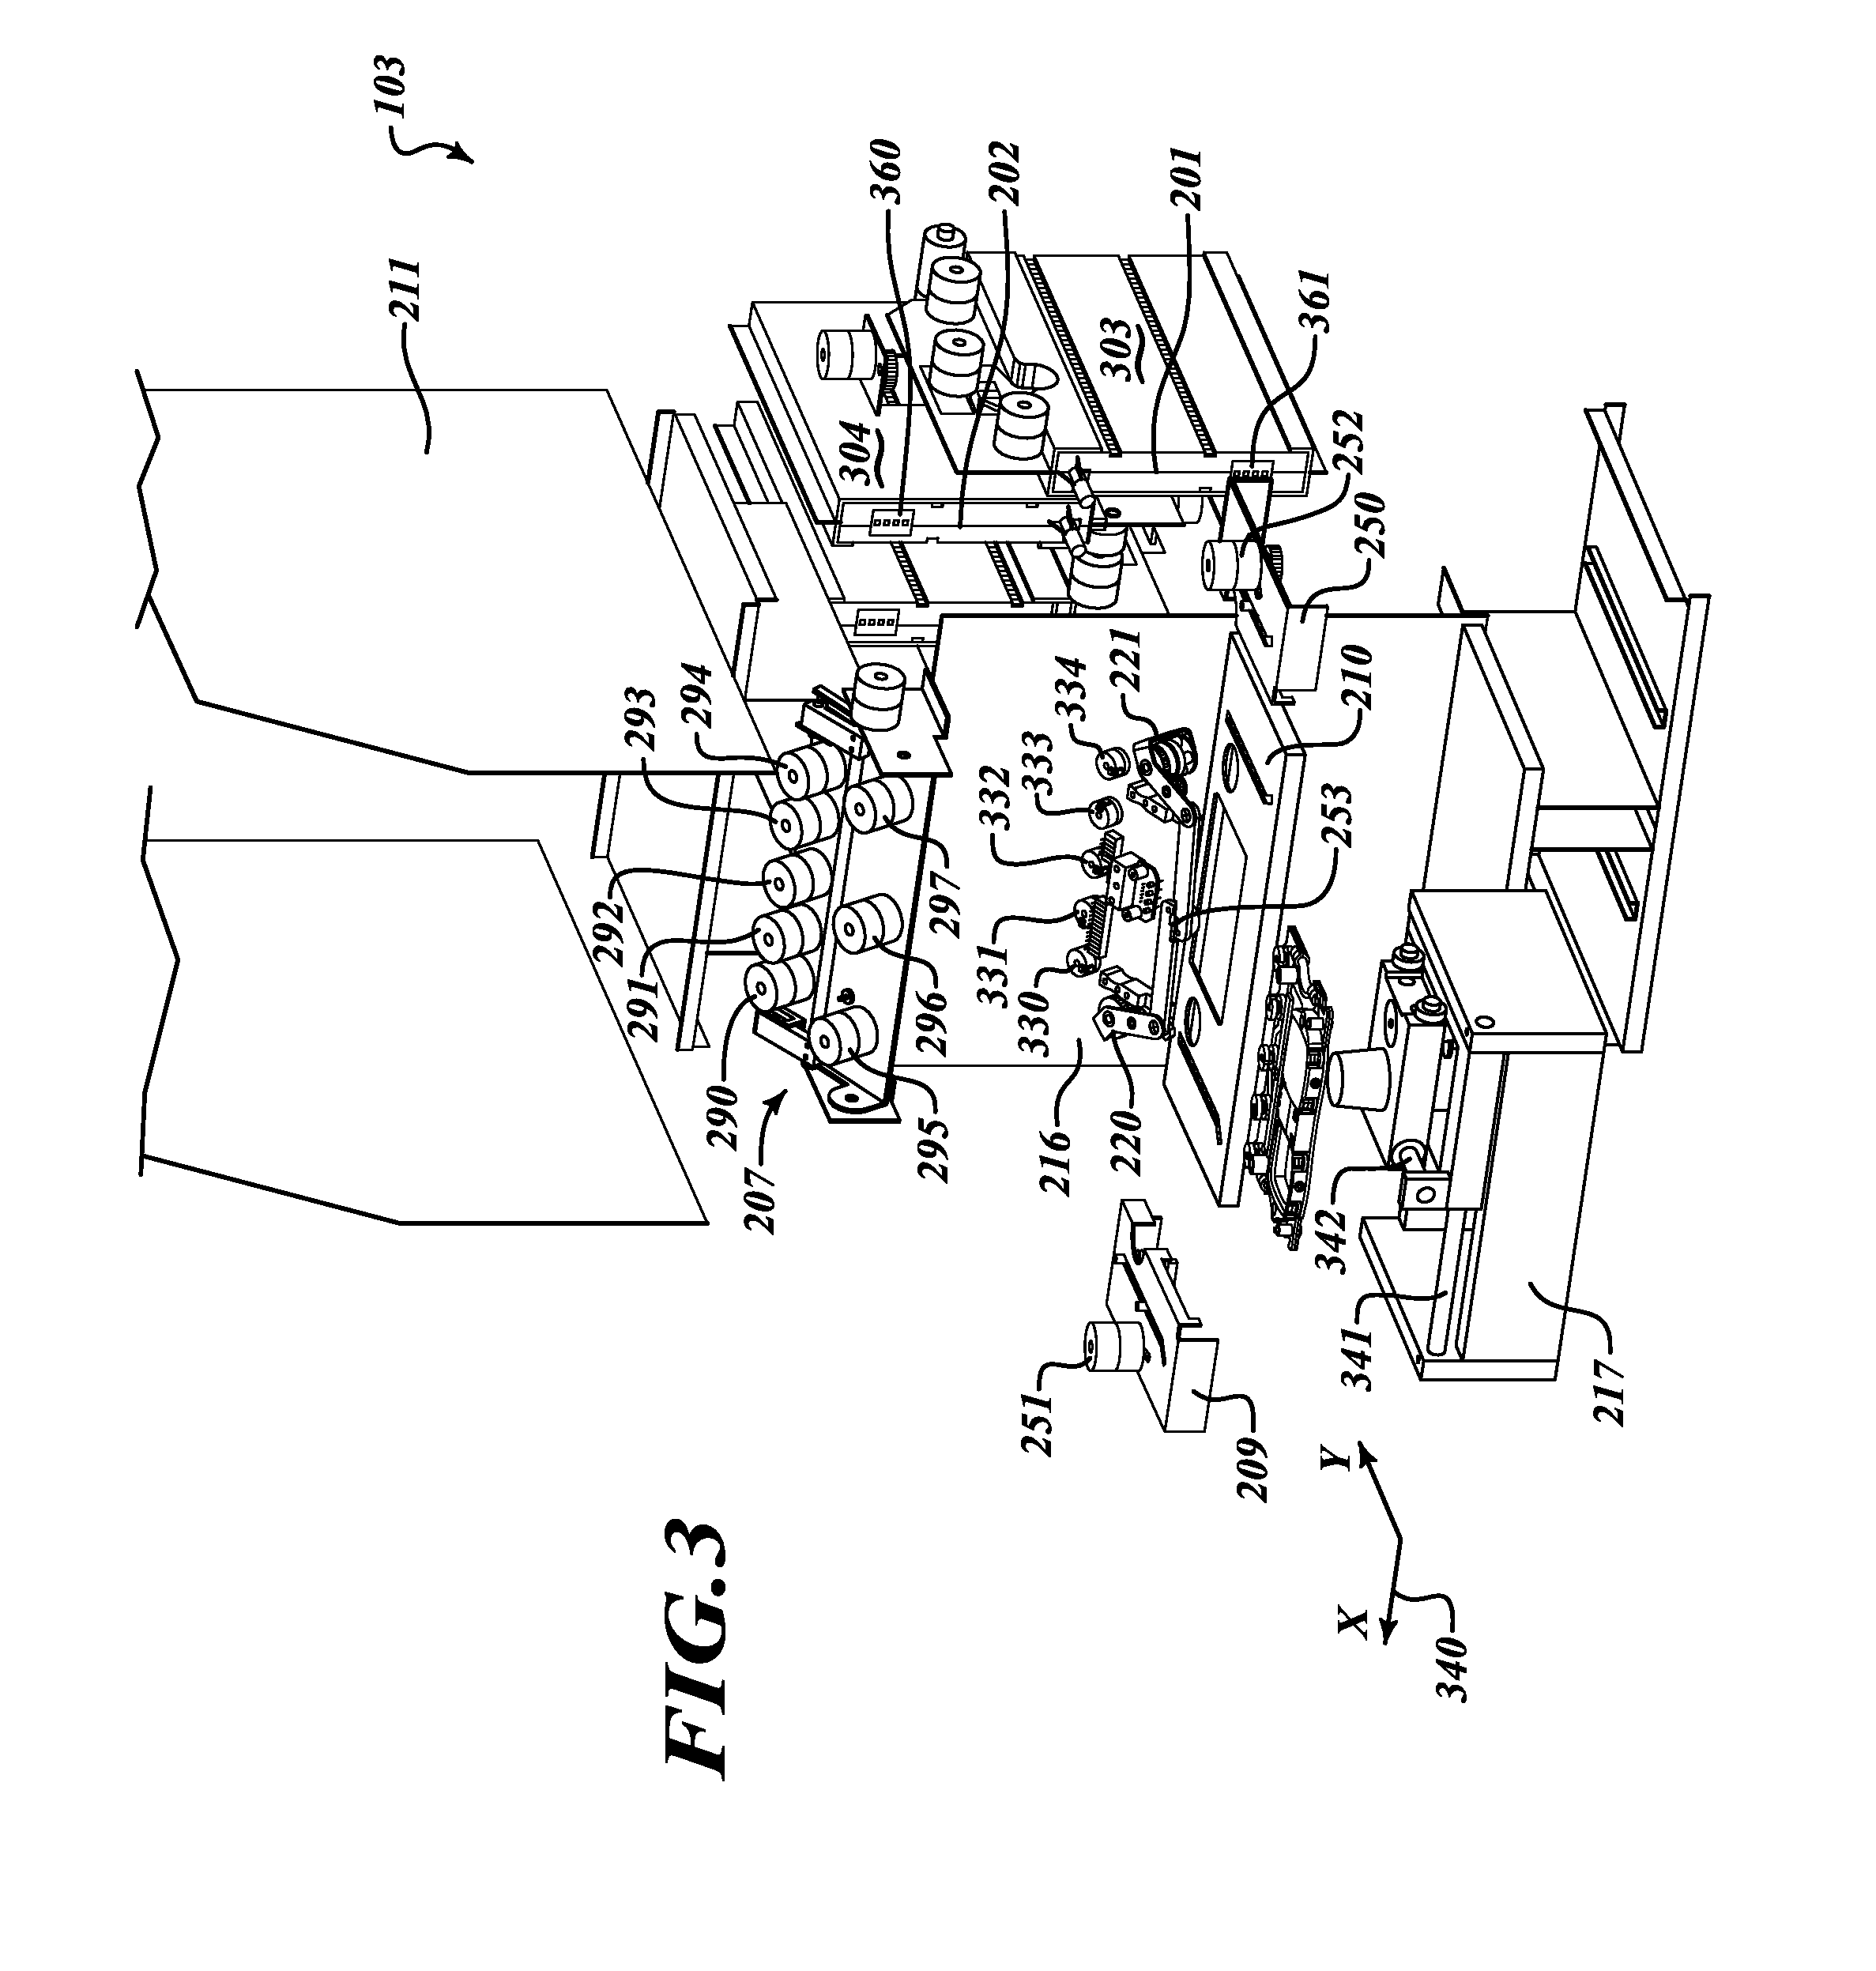 Culture systems, apparatus, and related methods and articles